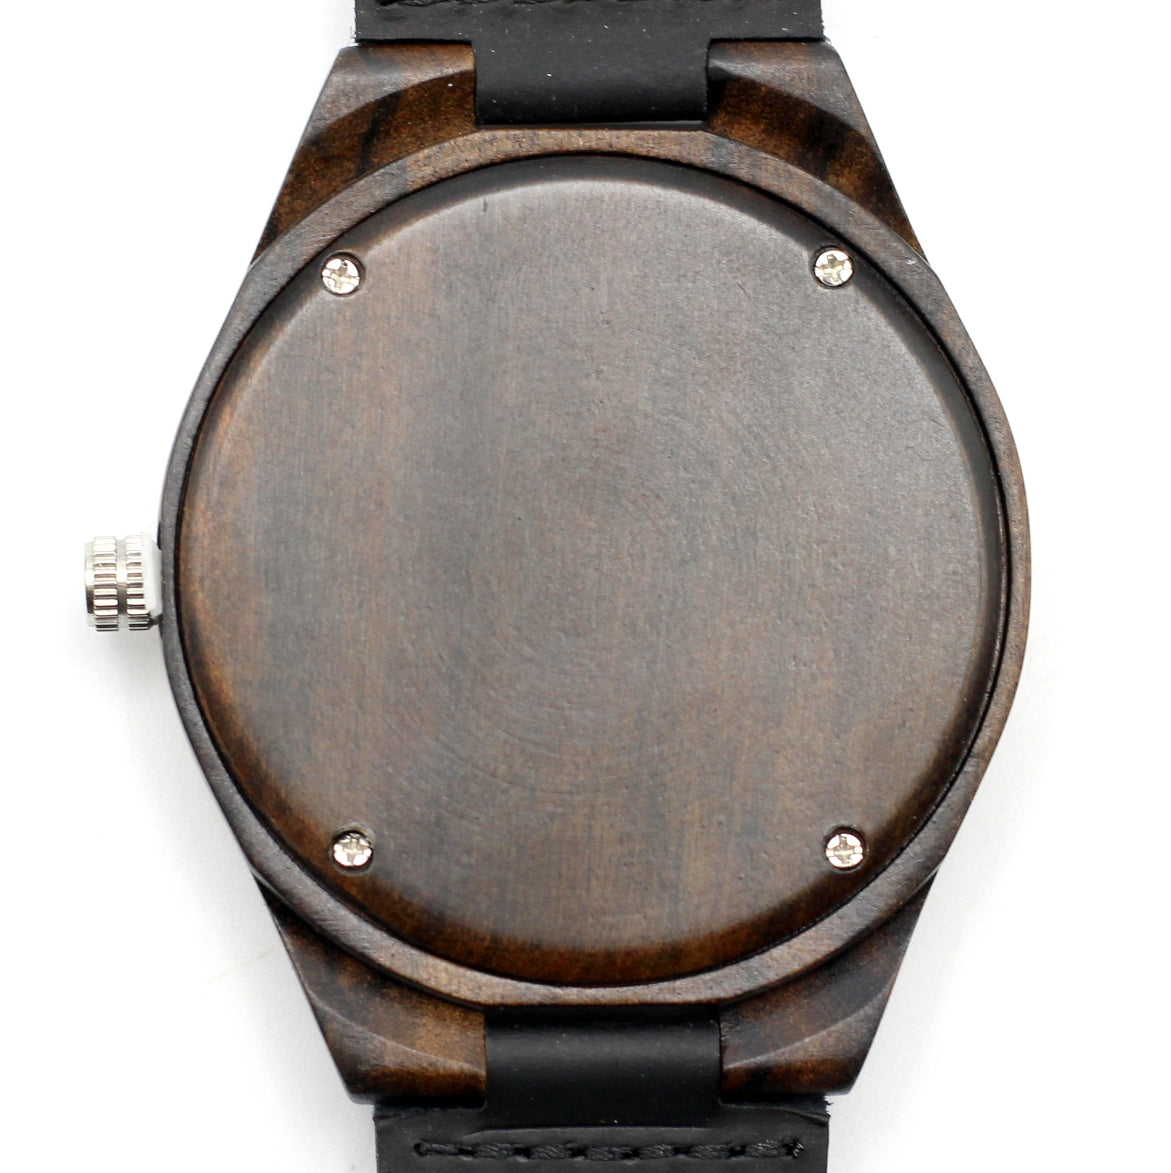 MANLY STRATA Wooden Watch with Black Leather Strap - Hashtag Bamboo